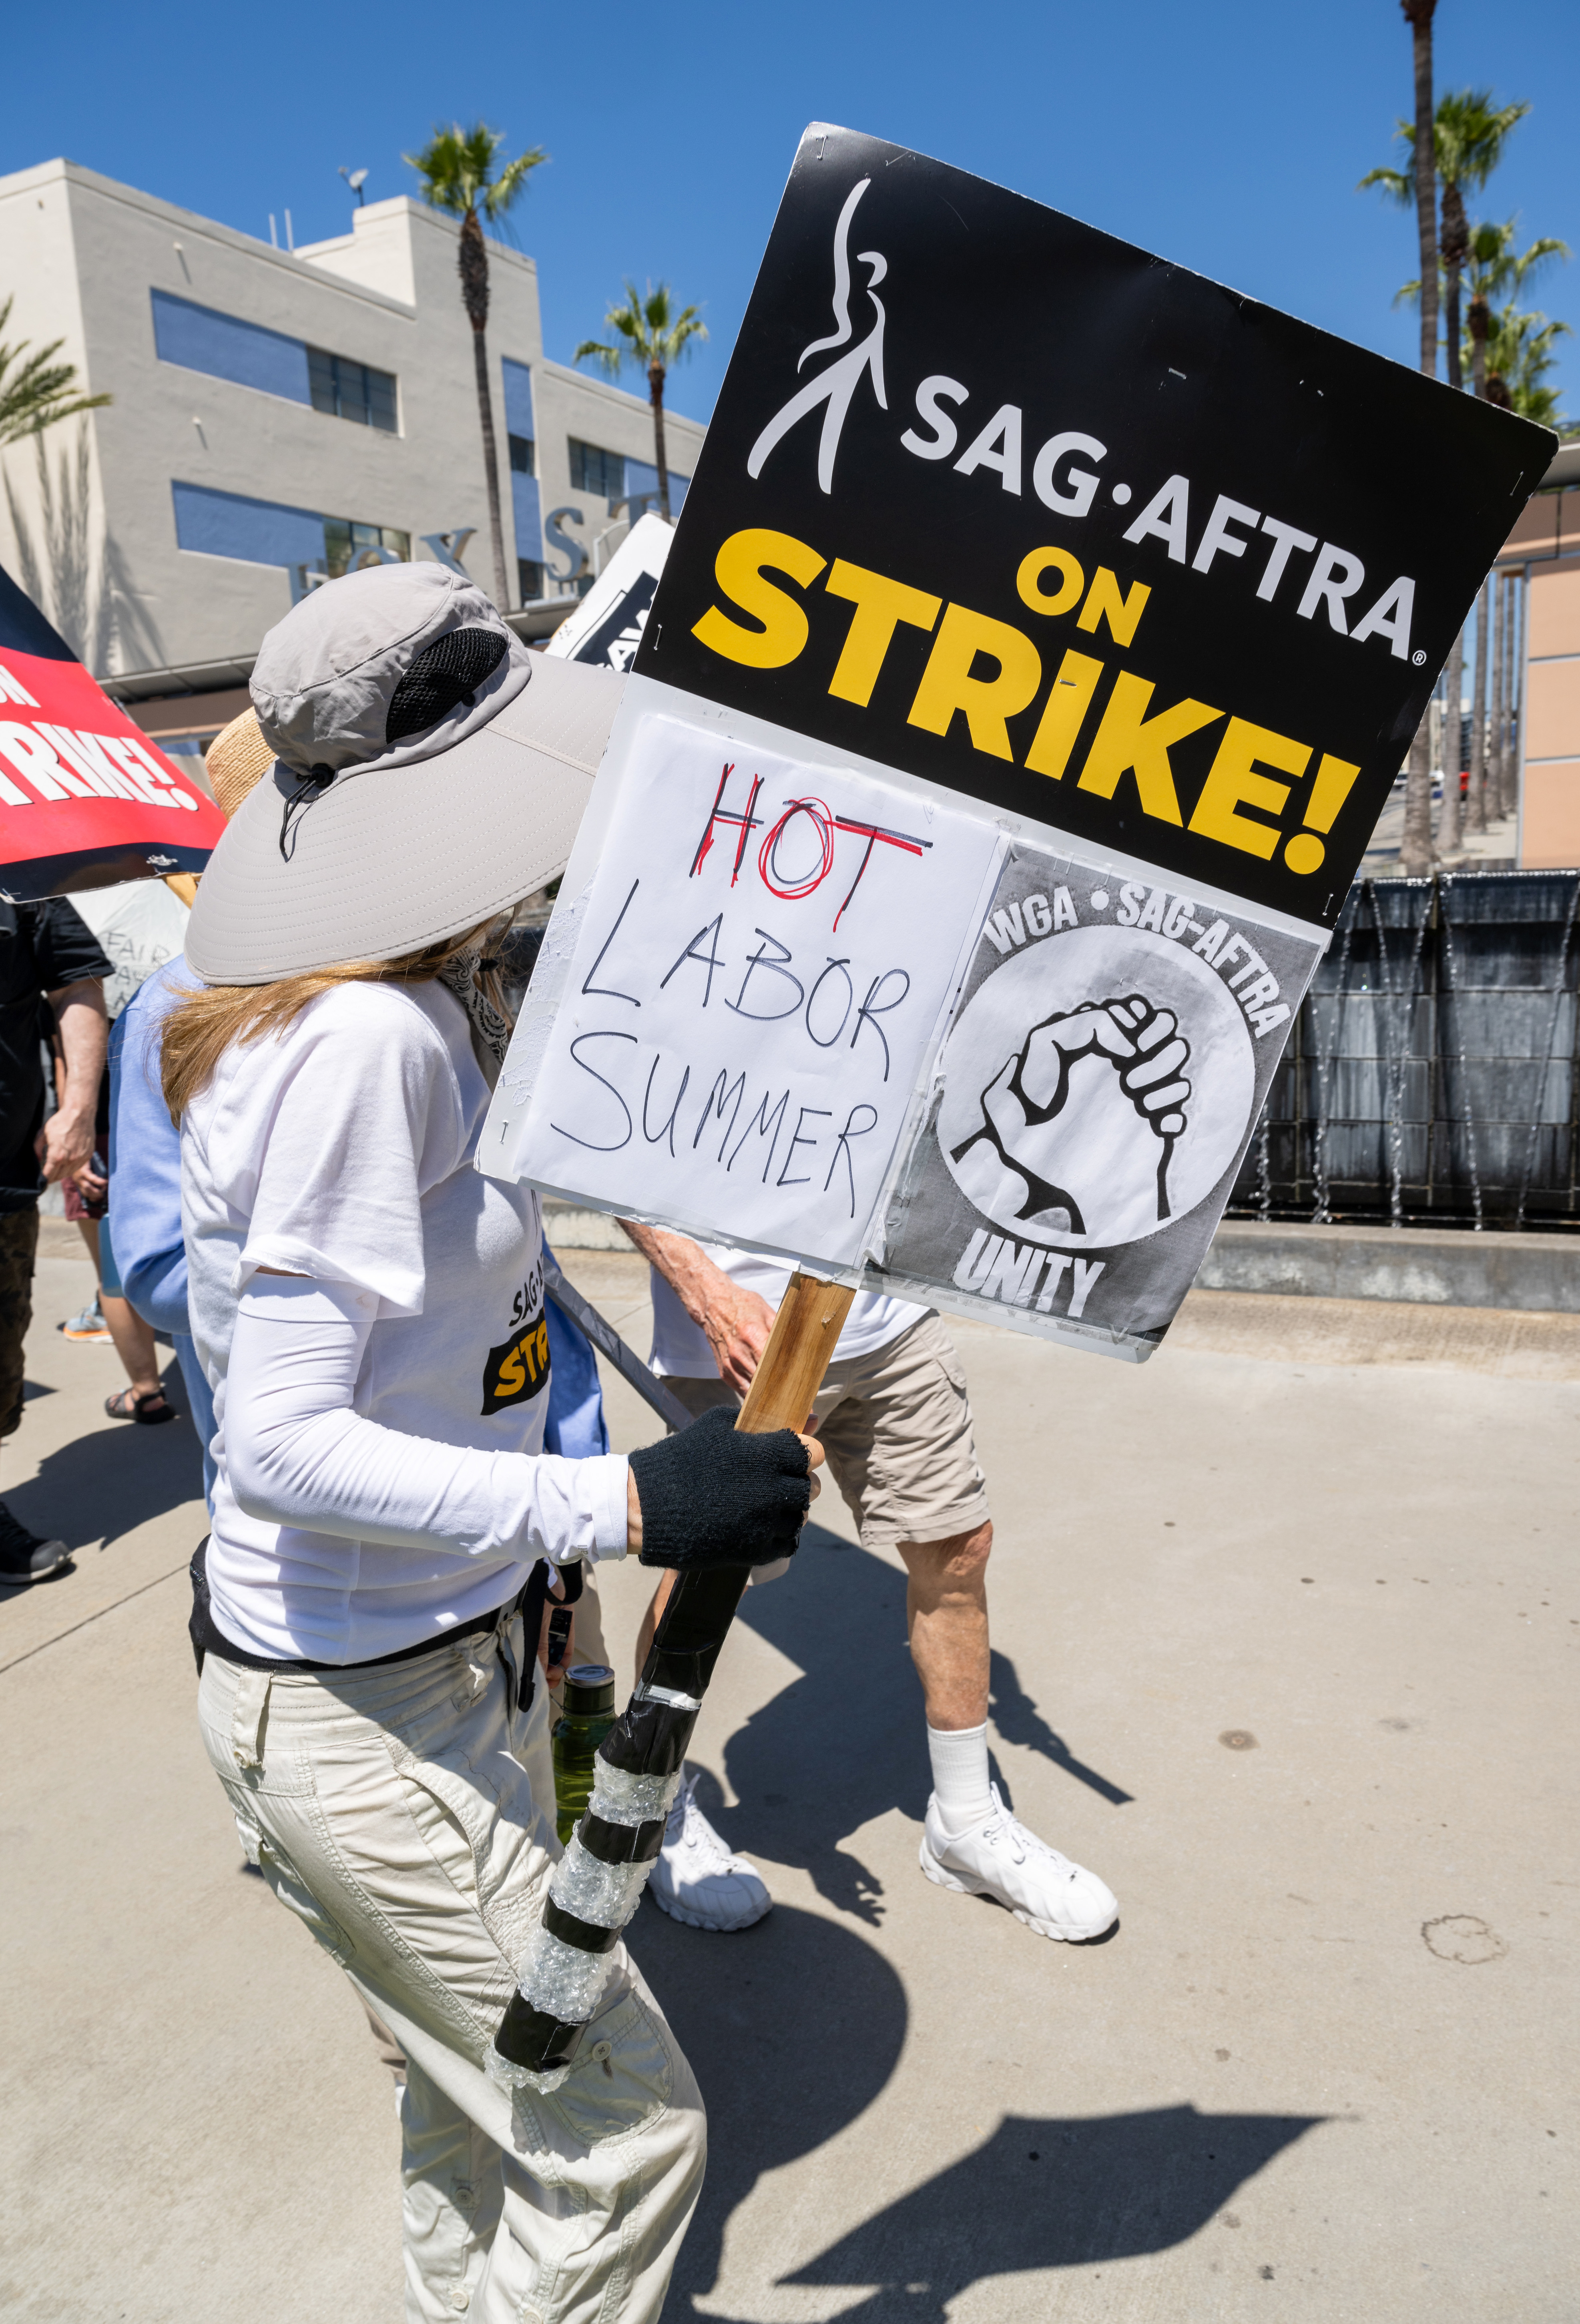 sag aftra member on the picket line with a sign that says hot labor summer